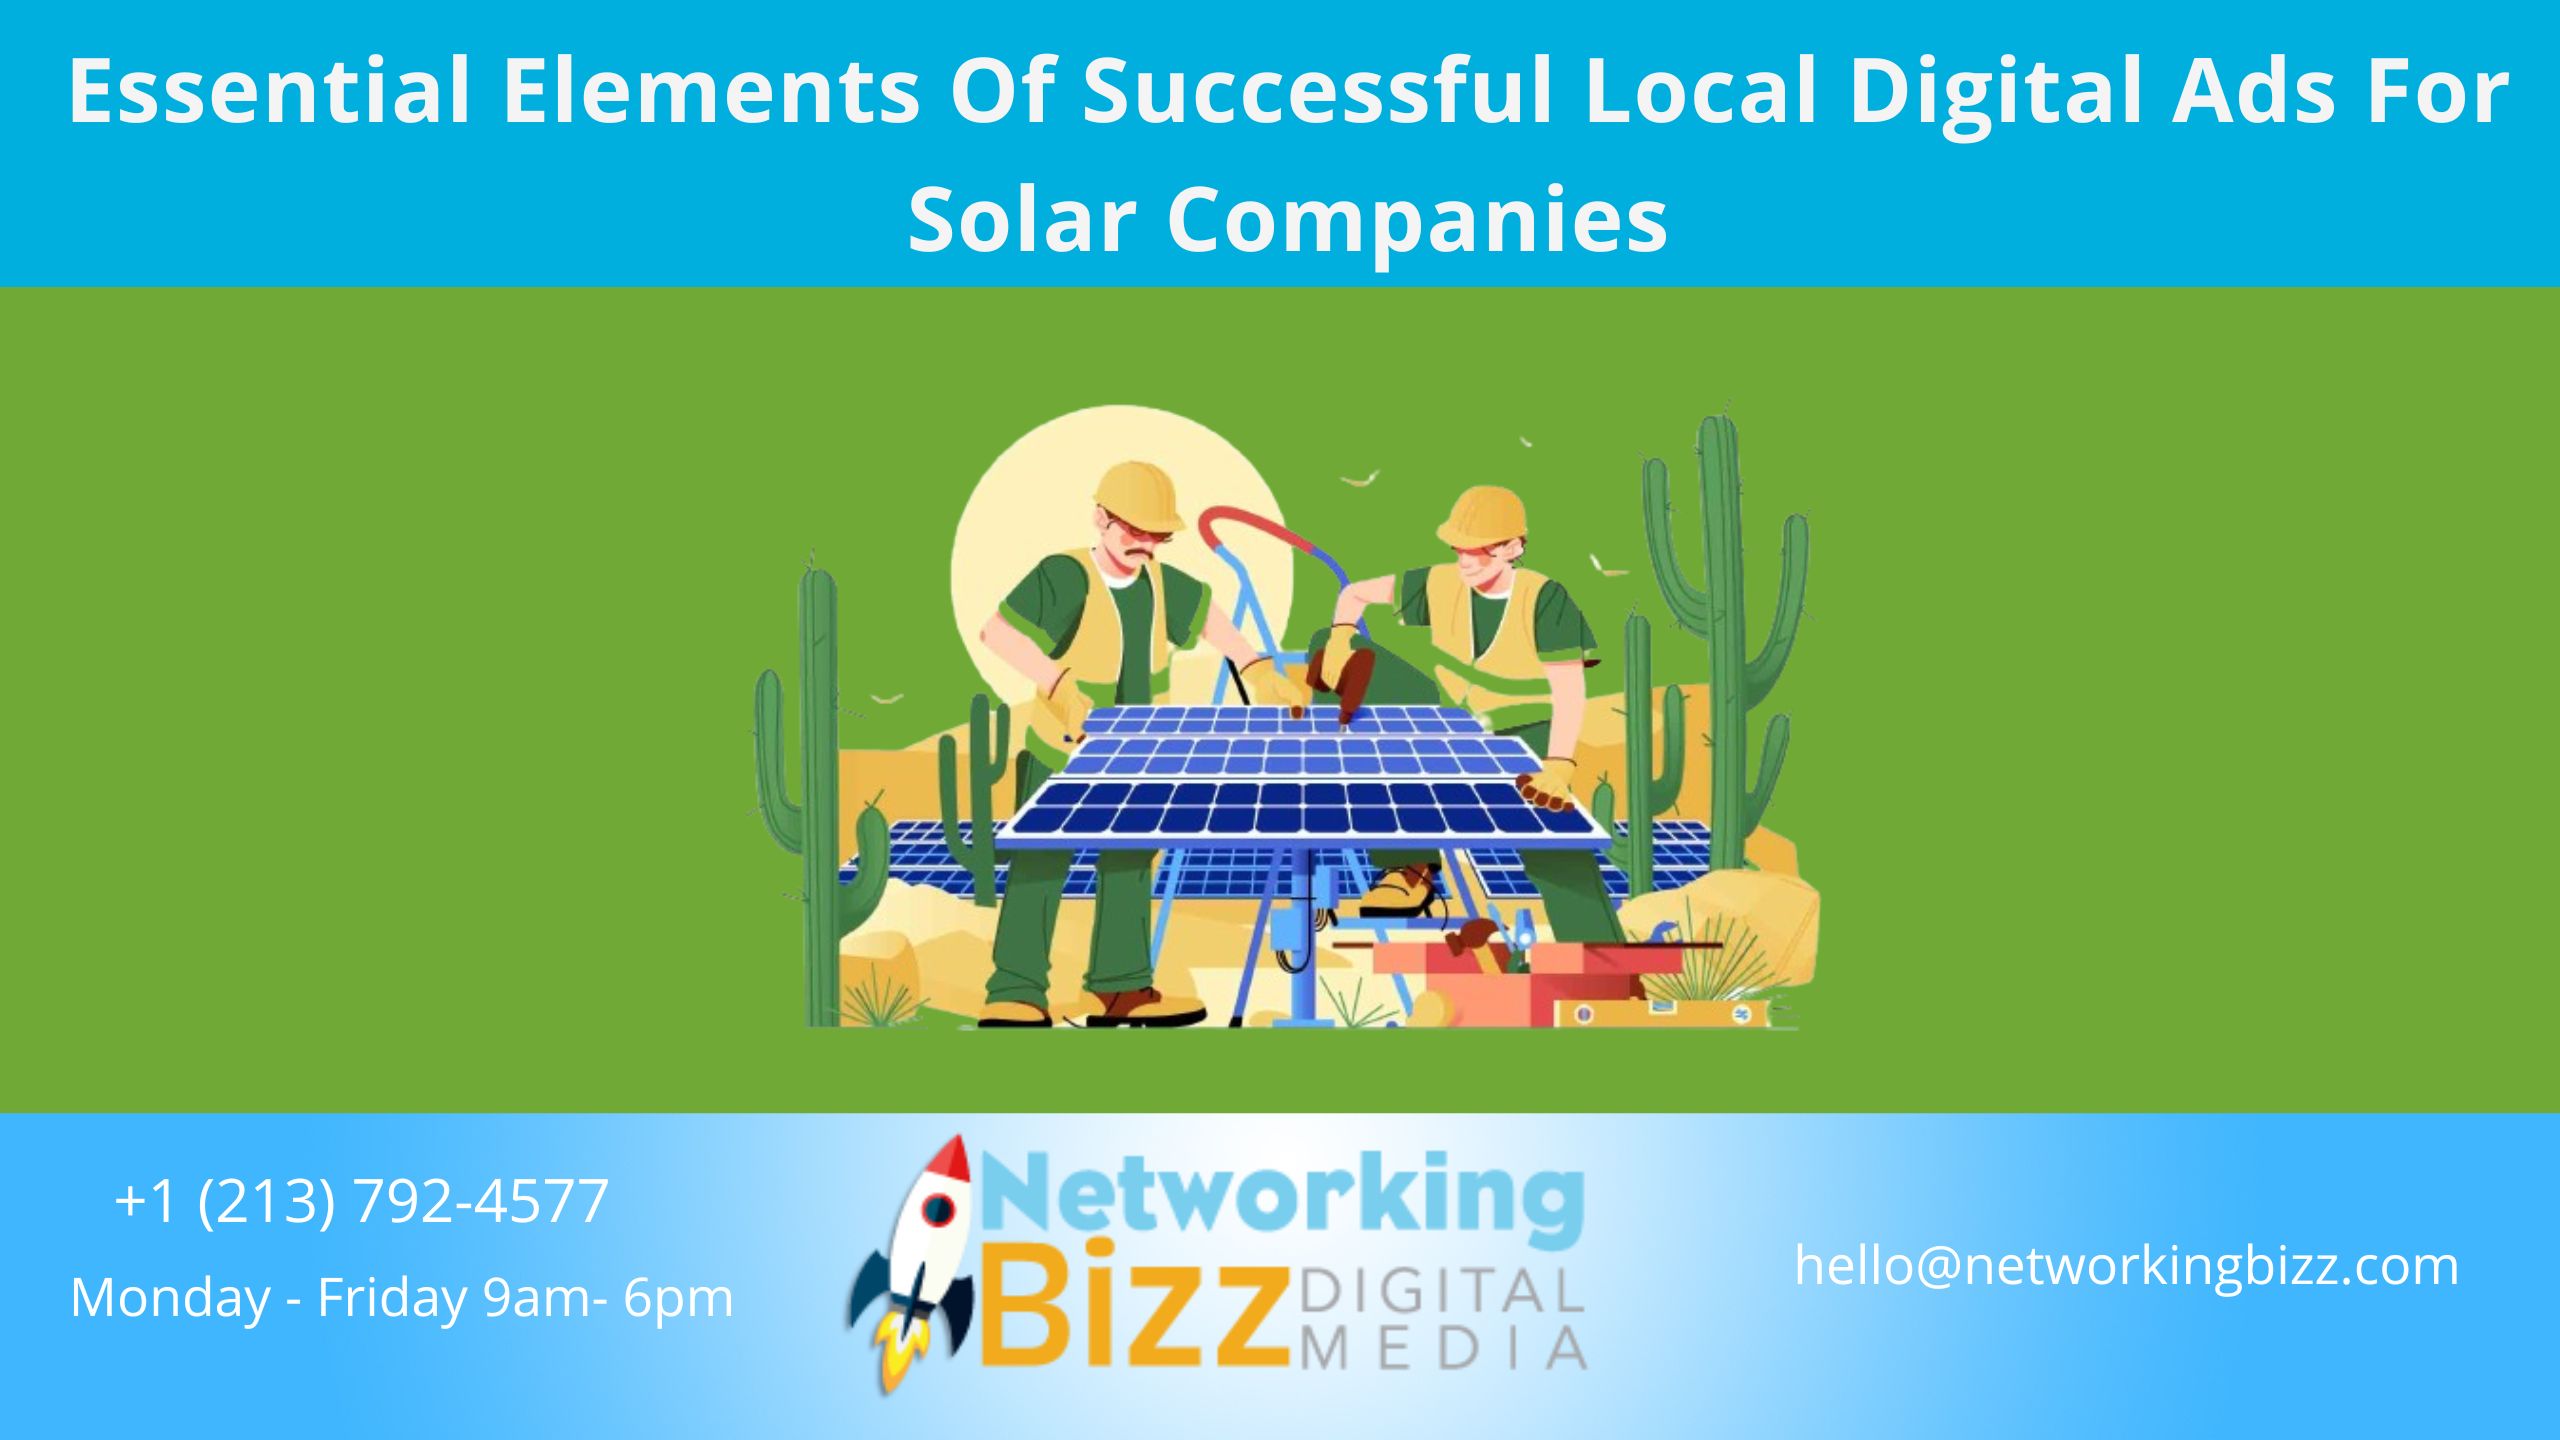 Essential Elements Of Successful Local Digital Ads For Solar Companies